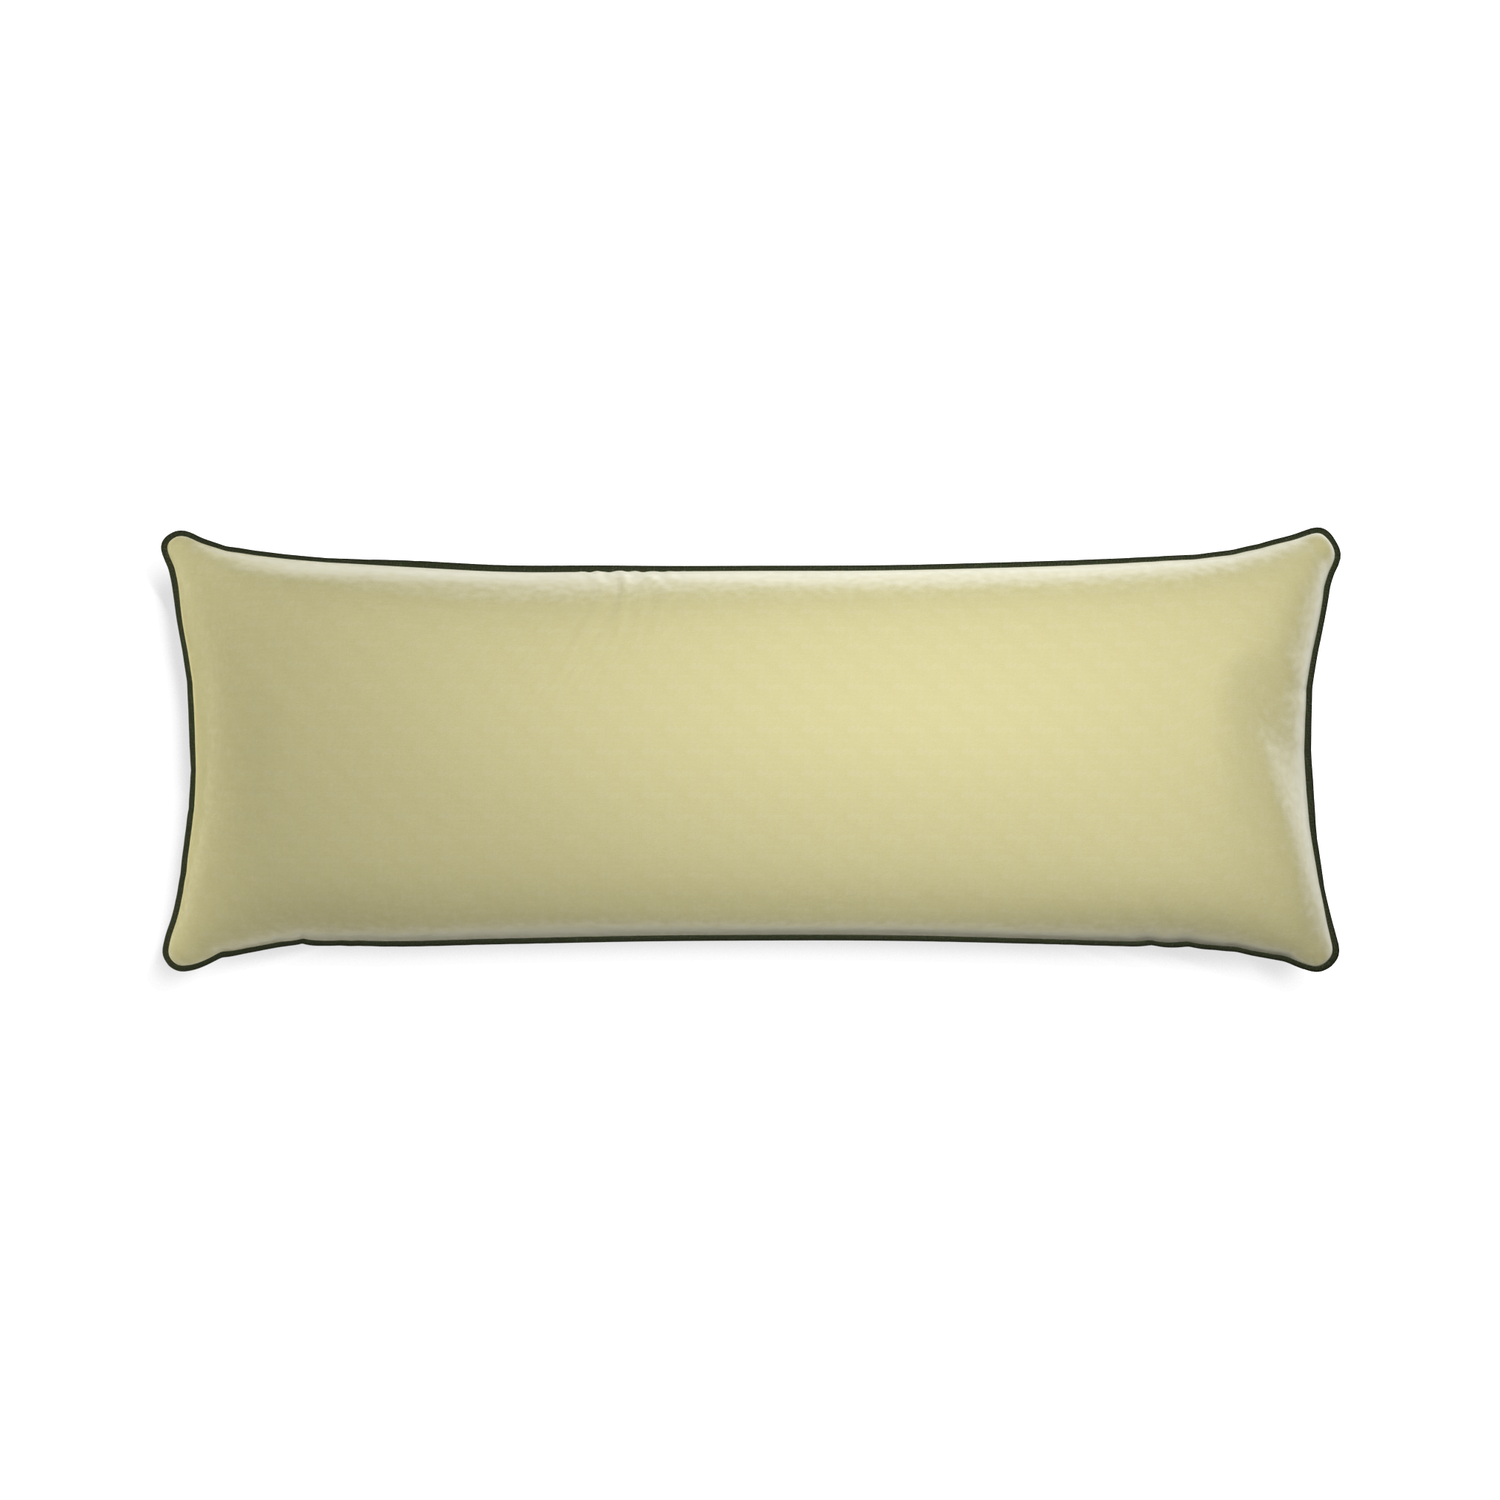 Xl-lumbar pear velvet custom light greenpillow with f piping on white background